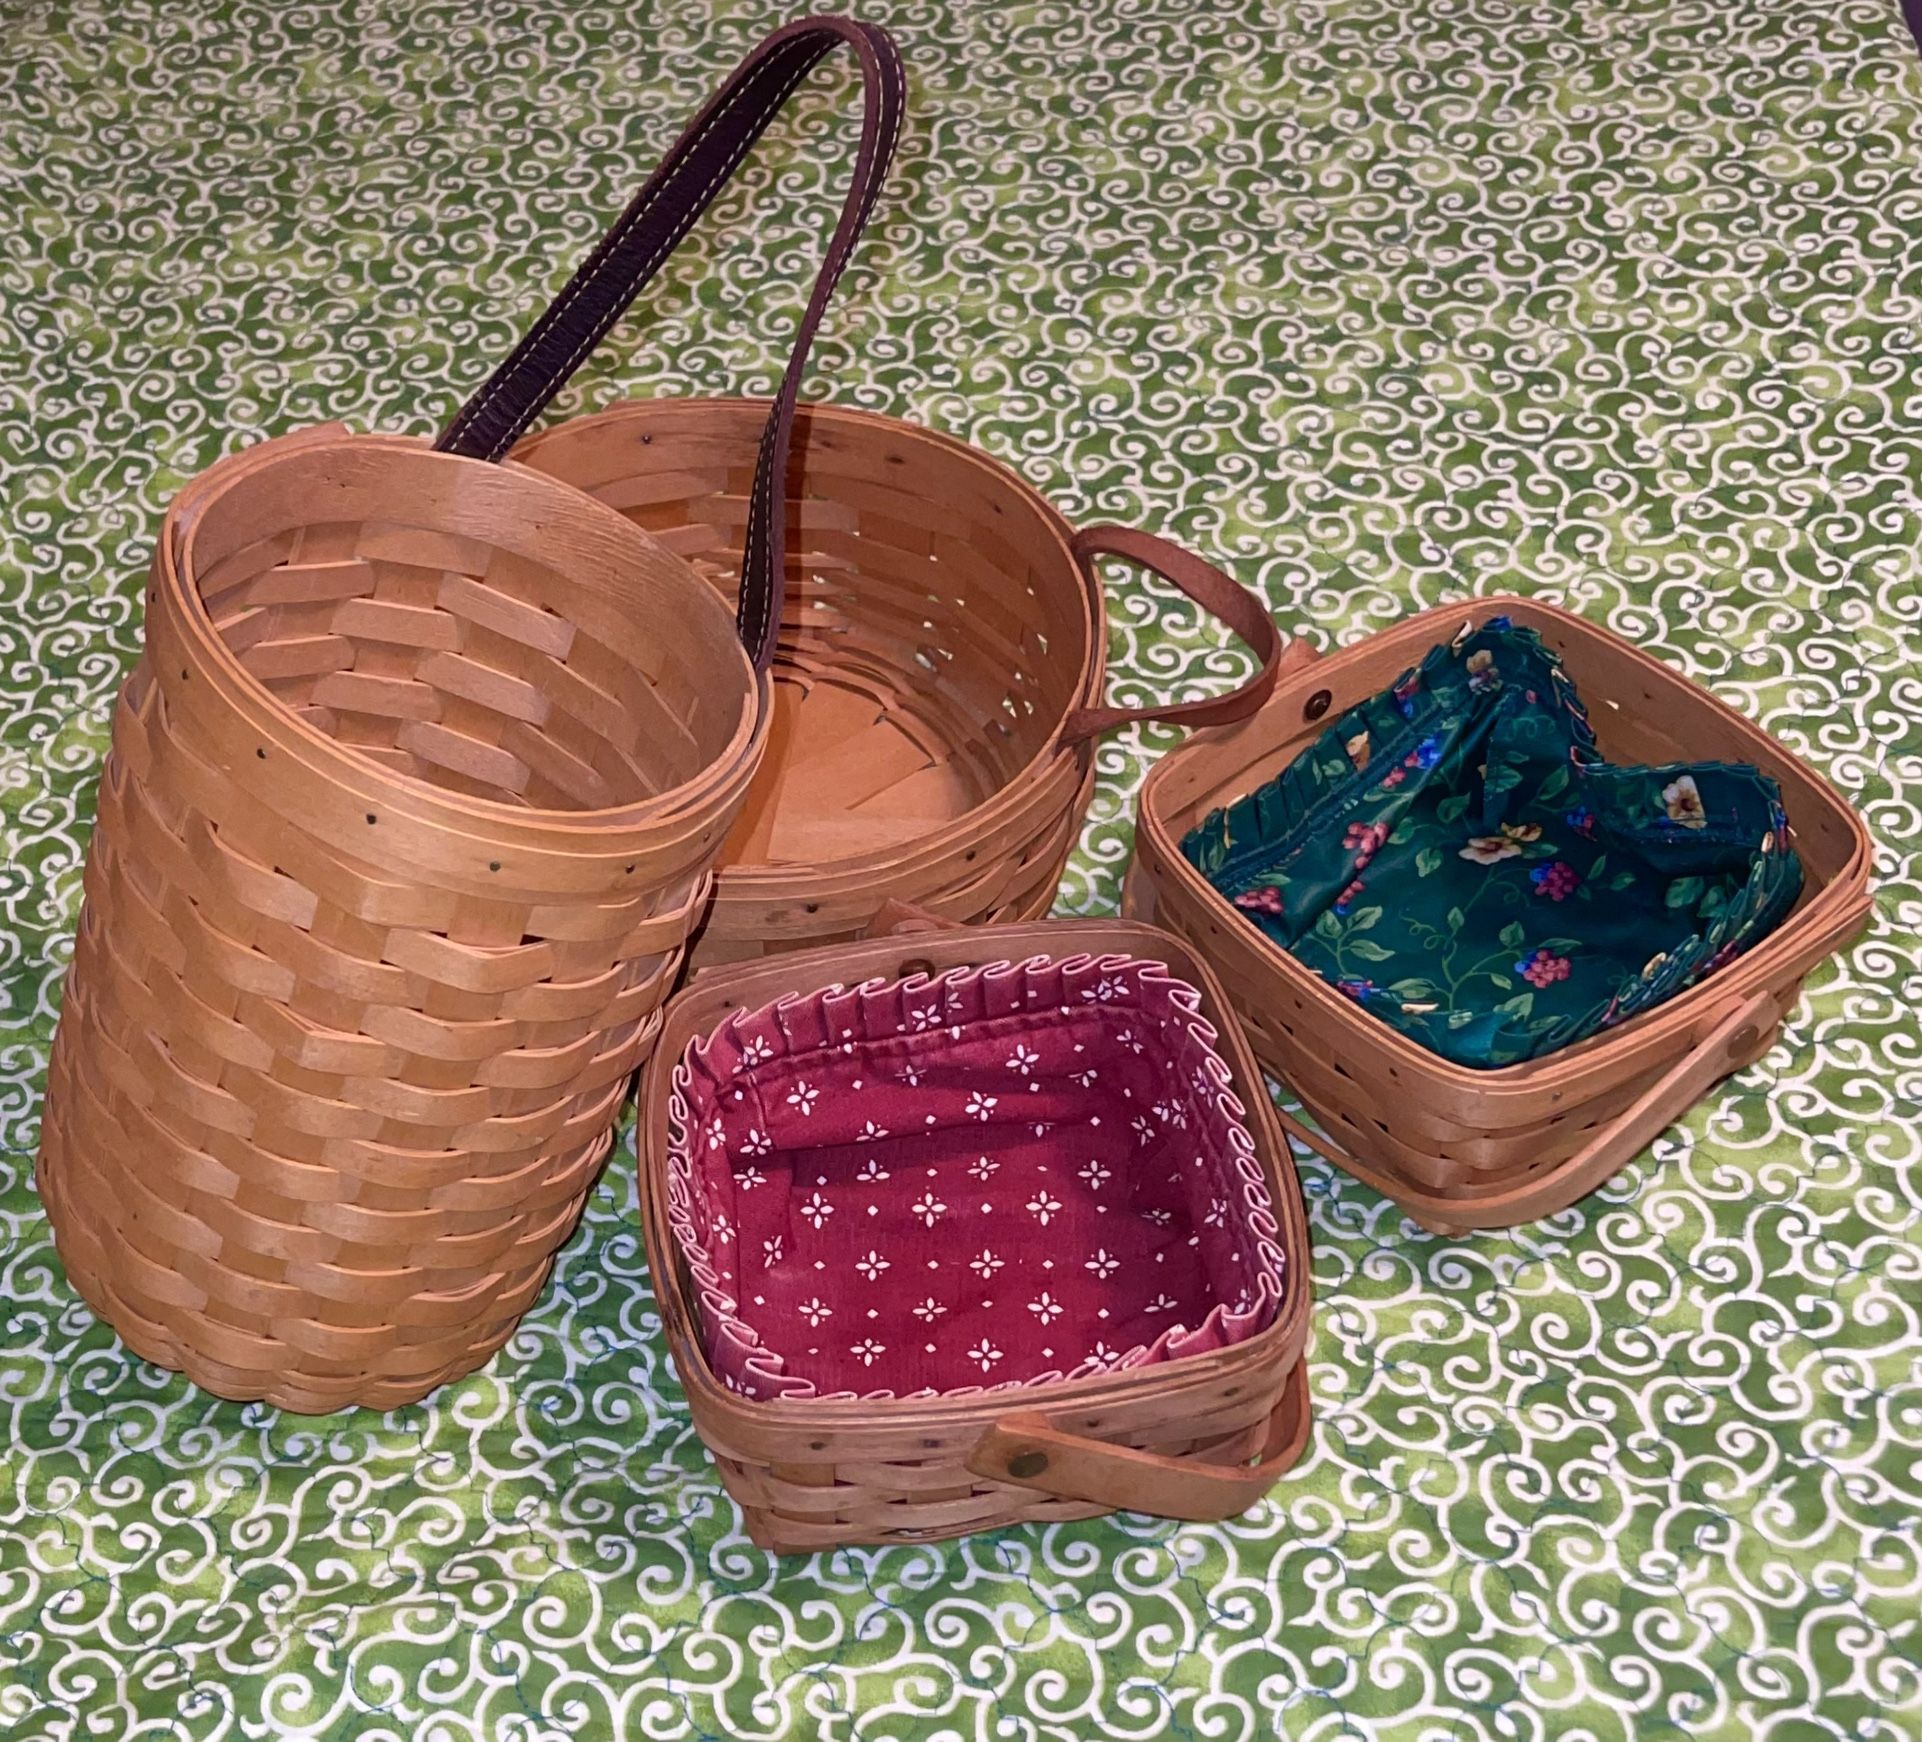 Longaberger Baskets 4 Medium Sized -  2 w/Fabric Liners 2 With Leather Handles